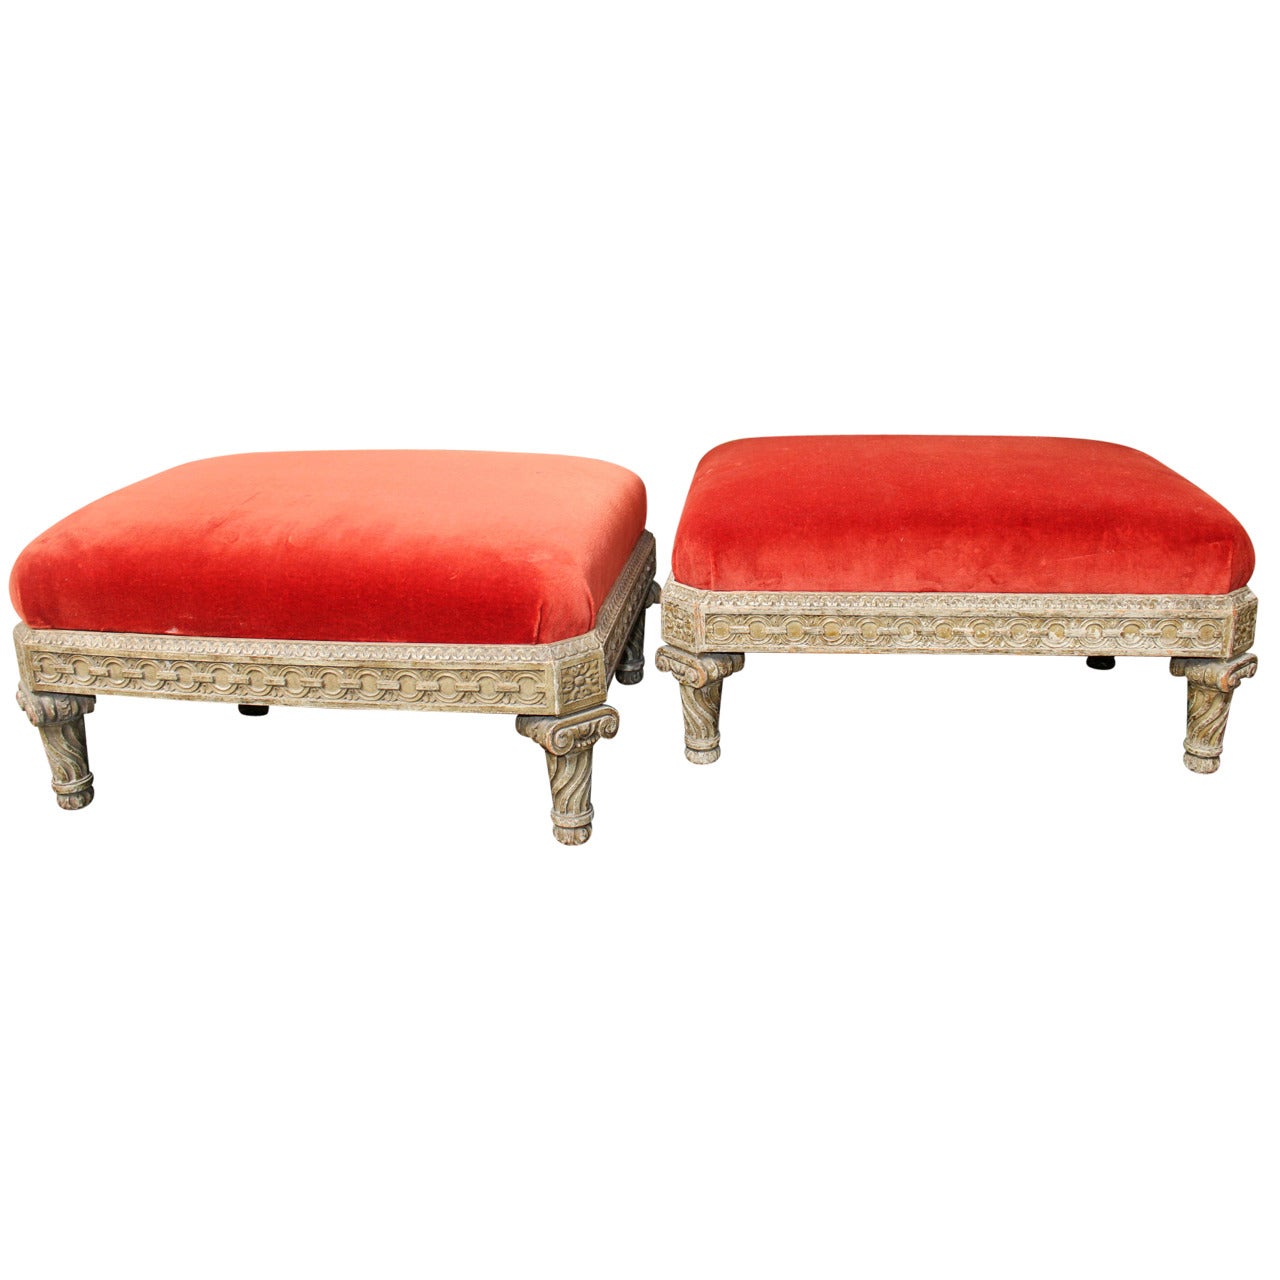 Pair of Beautifully Carved Louis XVI Style Painted Wood Tabourets